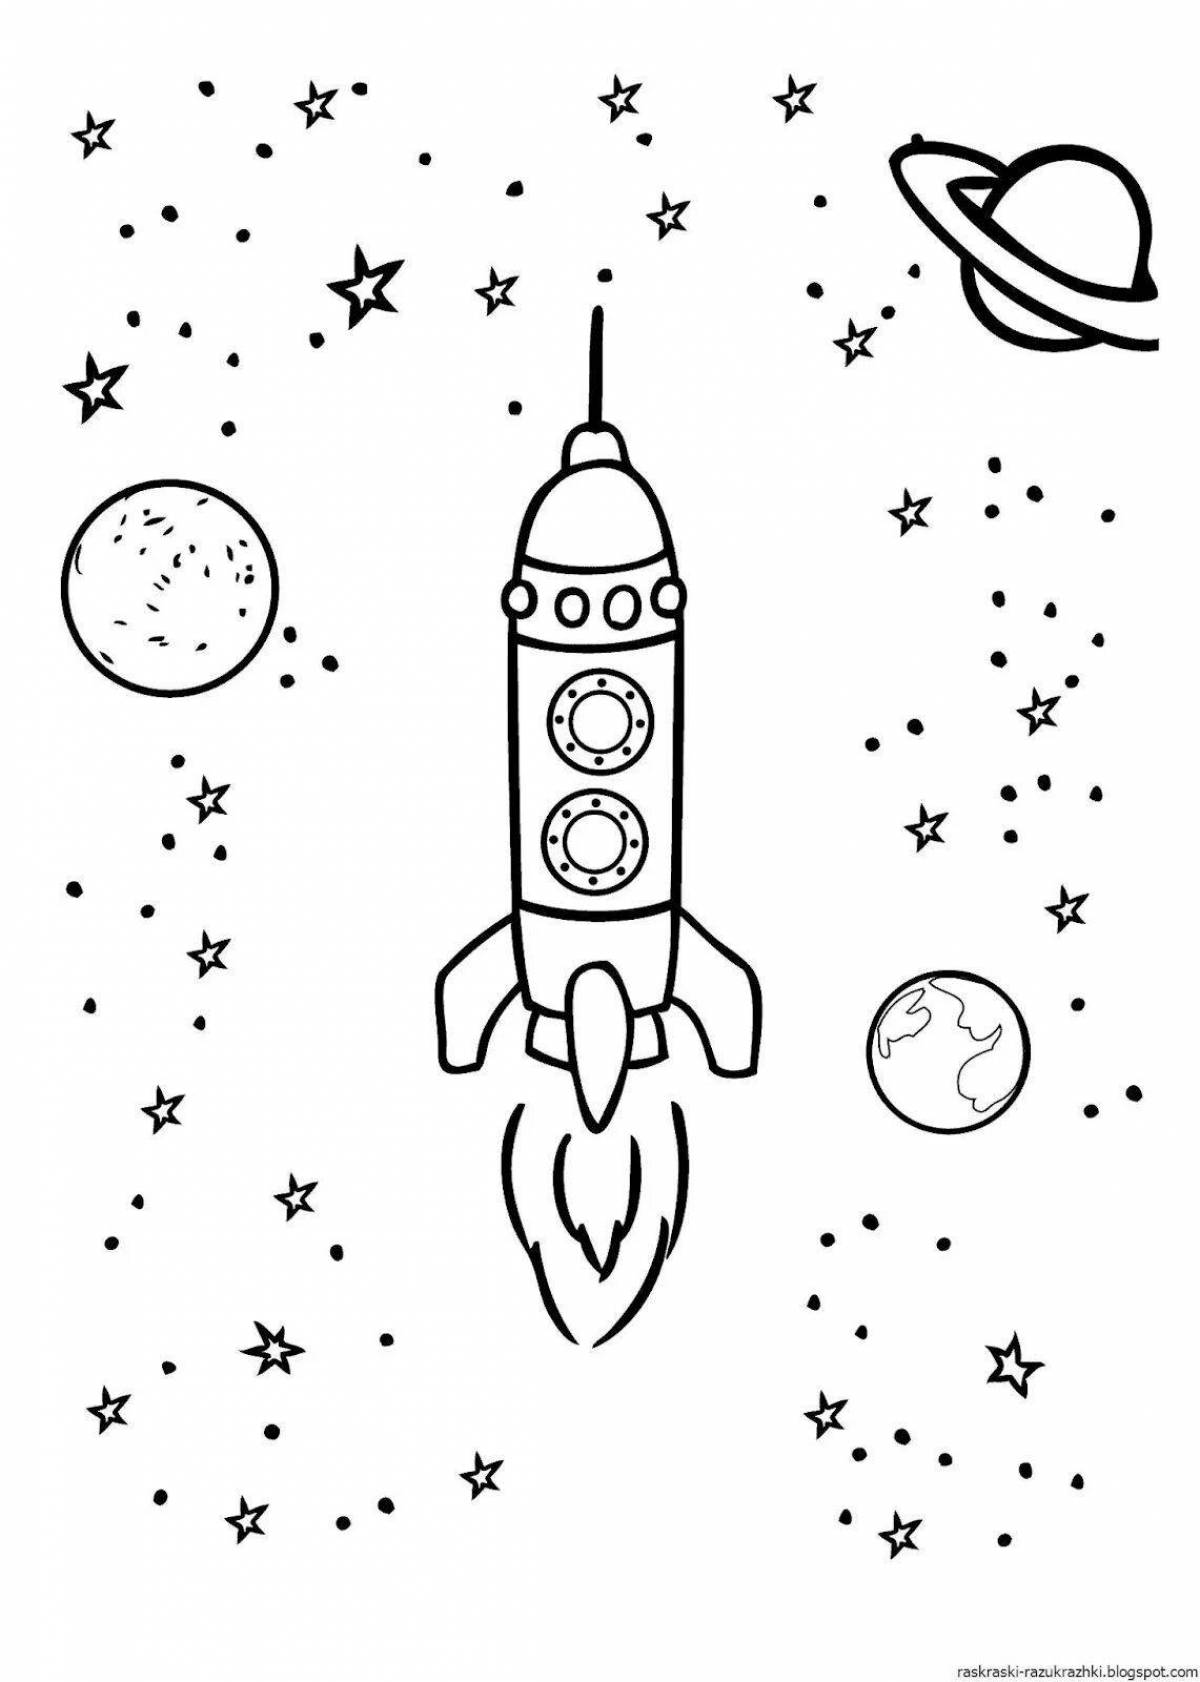 Exquisite rockets in space for kids